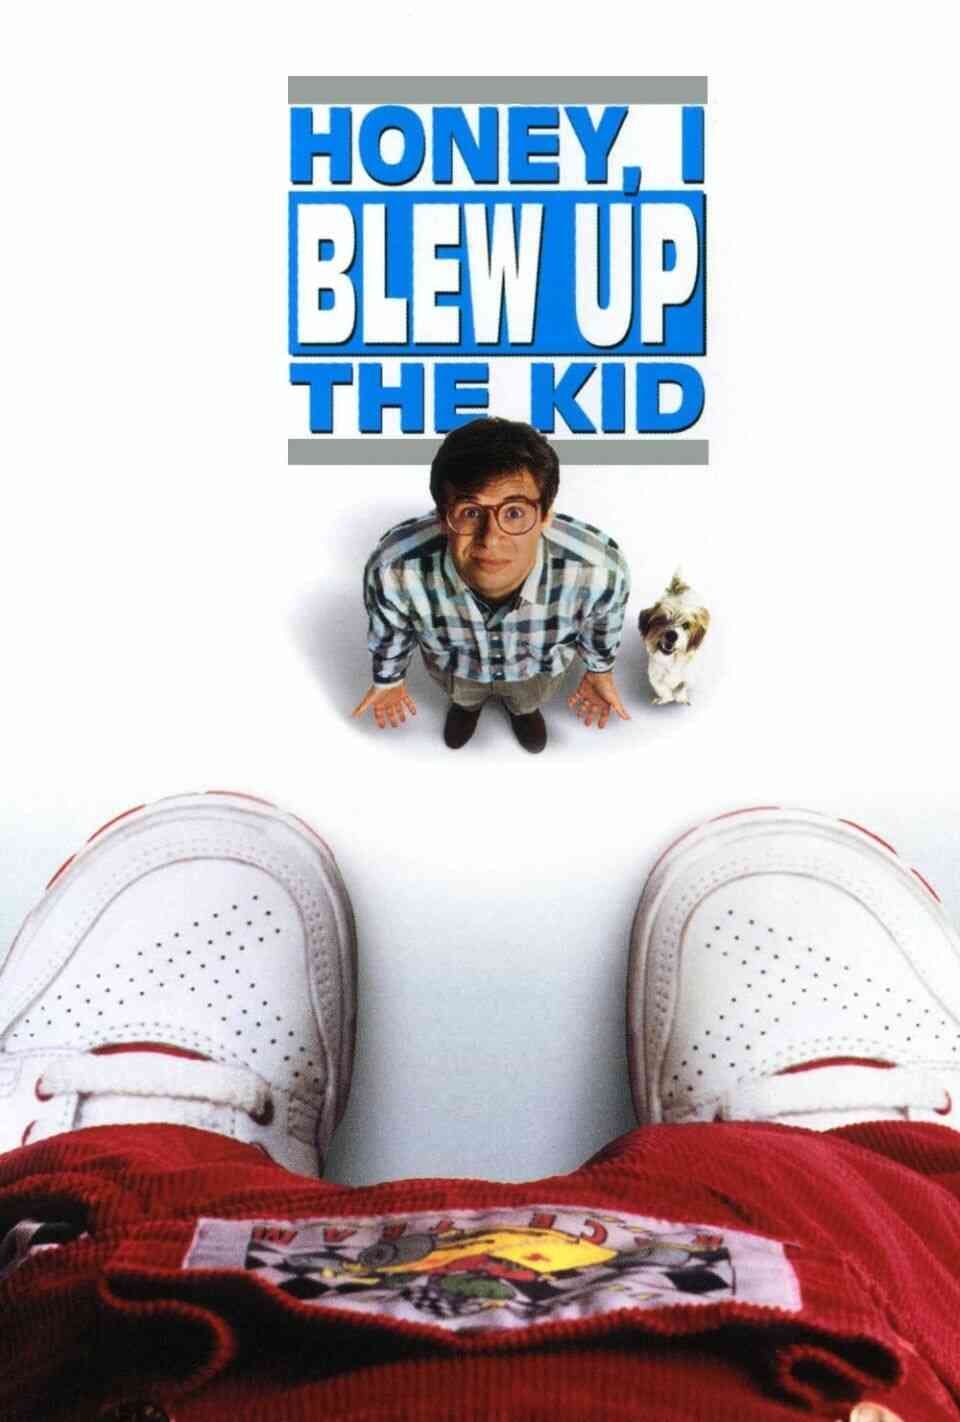 Read Honey, I Blew Up the Kid screenplay (poster)